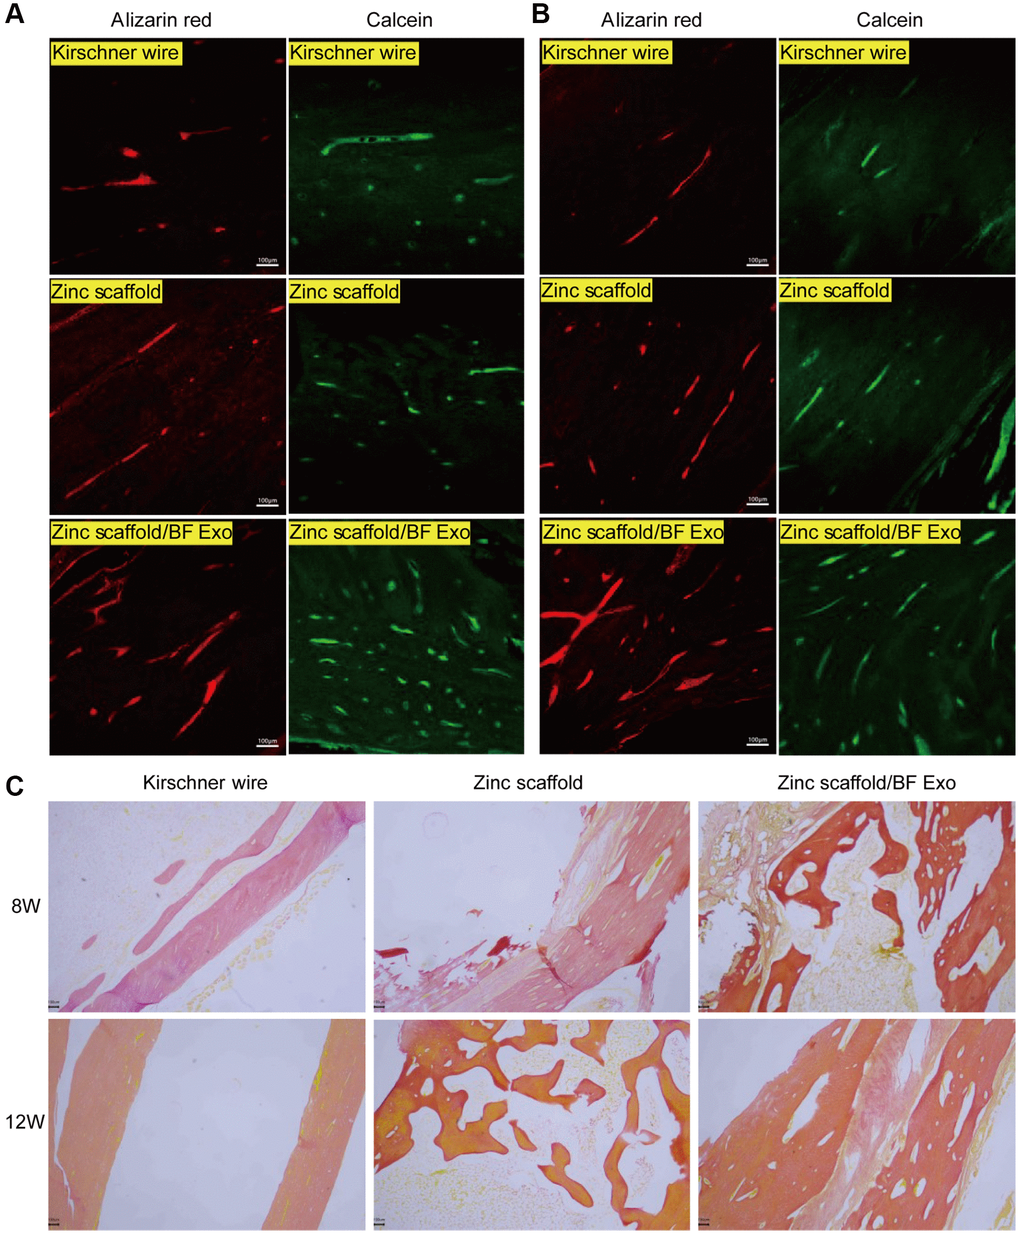 Fluorescence and staining experiments on rabbit radius bones. (A) Alizarin Red and Calcein Green fluorescence results of rabbit radius tissues after 8 weeks of modeling in each group; (B) Alizarin Red and Calcein Green fluorescence results of rabbit radius tissues after 12 weeks of modeling in each group; (C) Methylene blue-acidic magenta staining results of rabbit radius tissues after 8 and 12 weeks of modeling in each group (100×, n = 3).